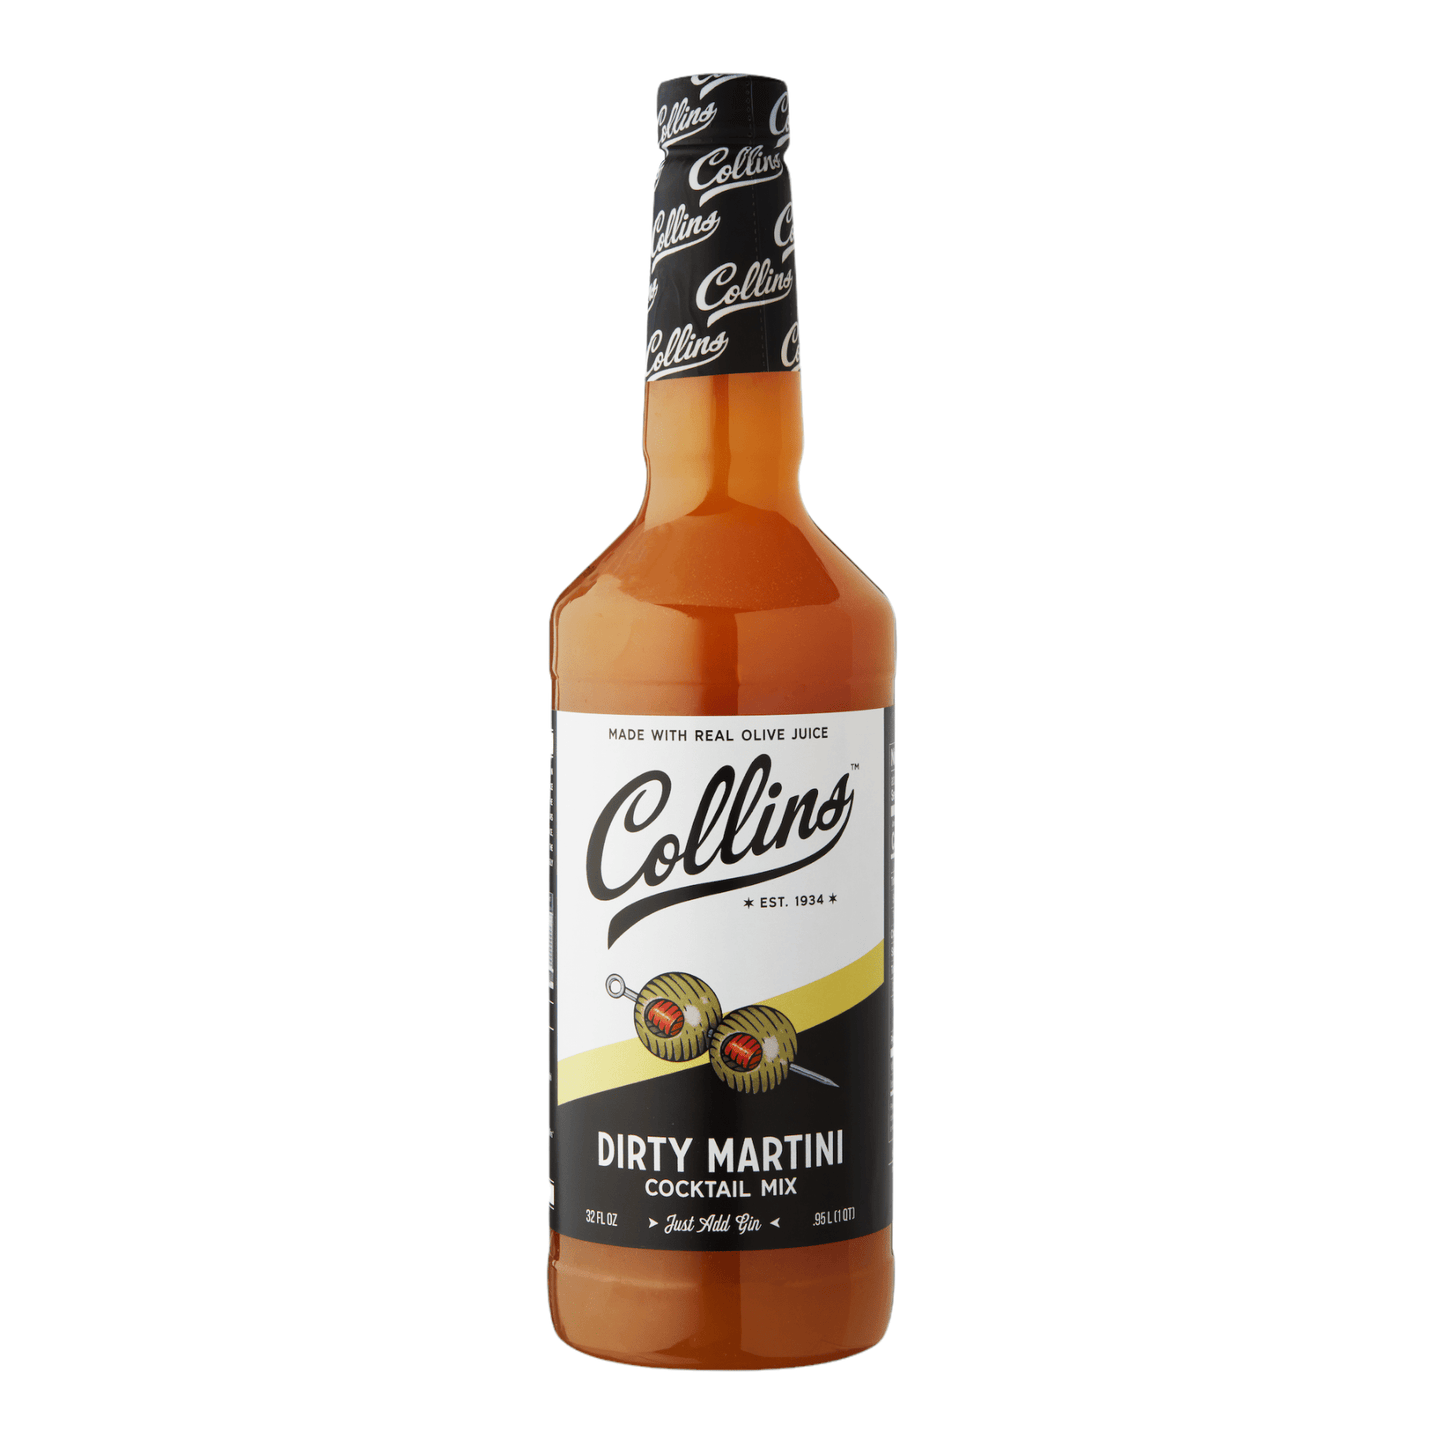 Dirty Martini Cocktail Mix by Collins - 32 fl oz